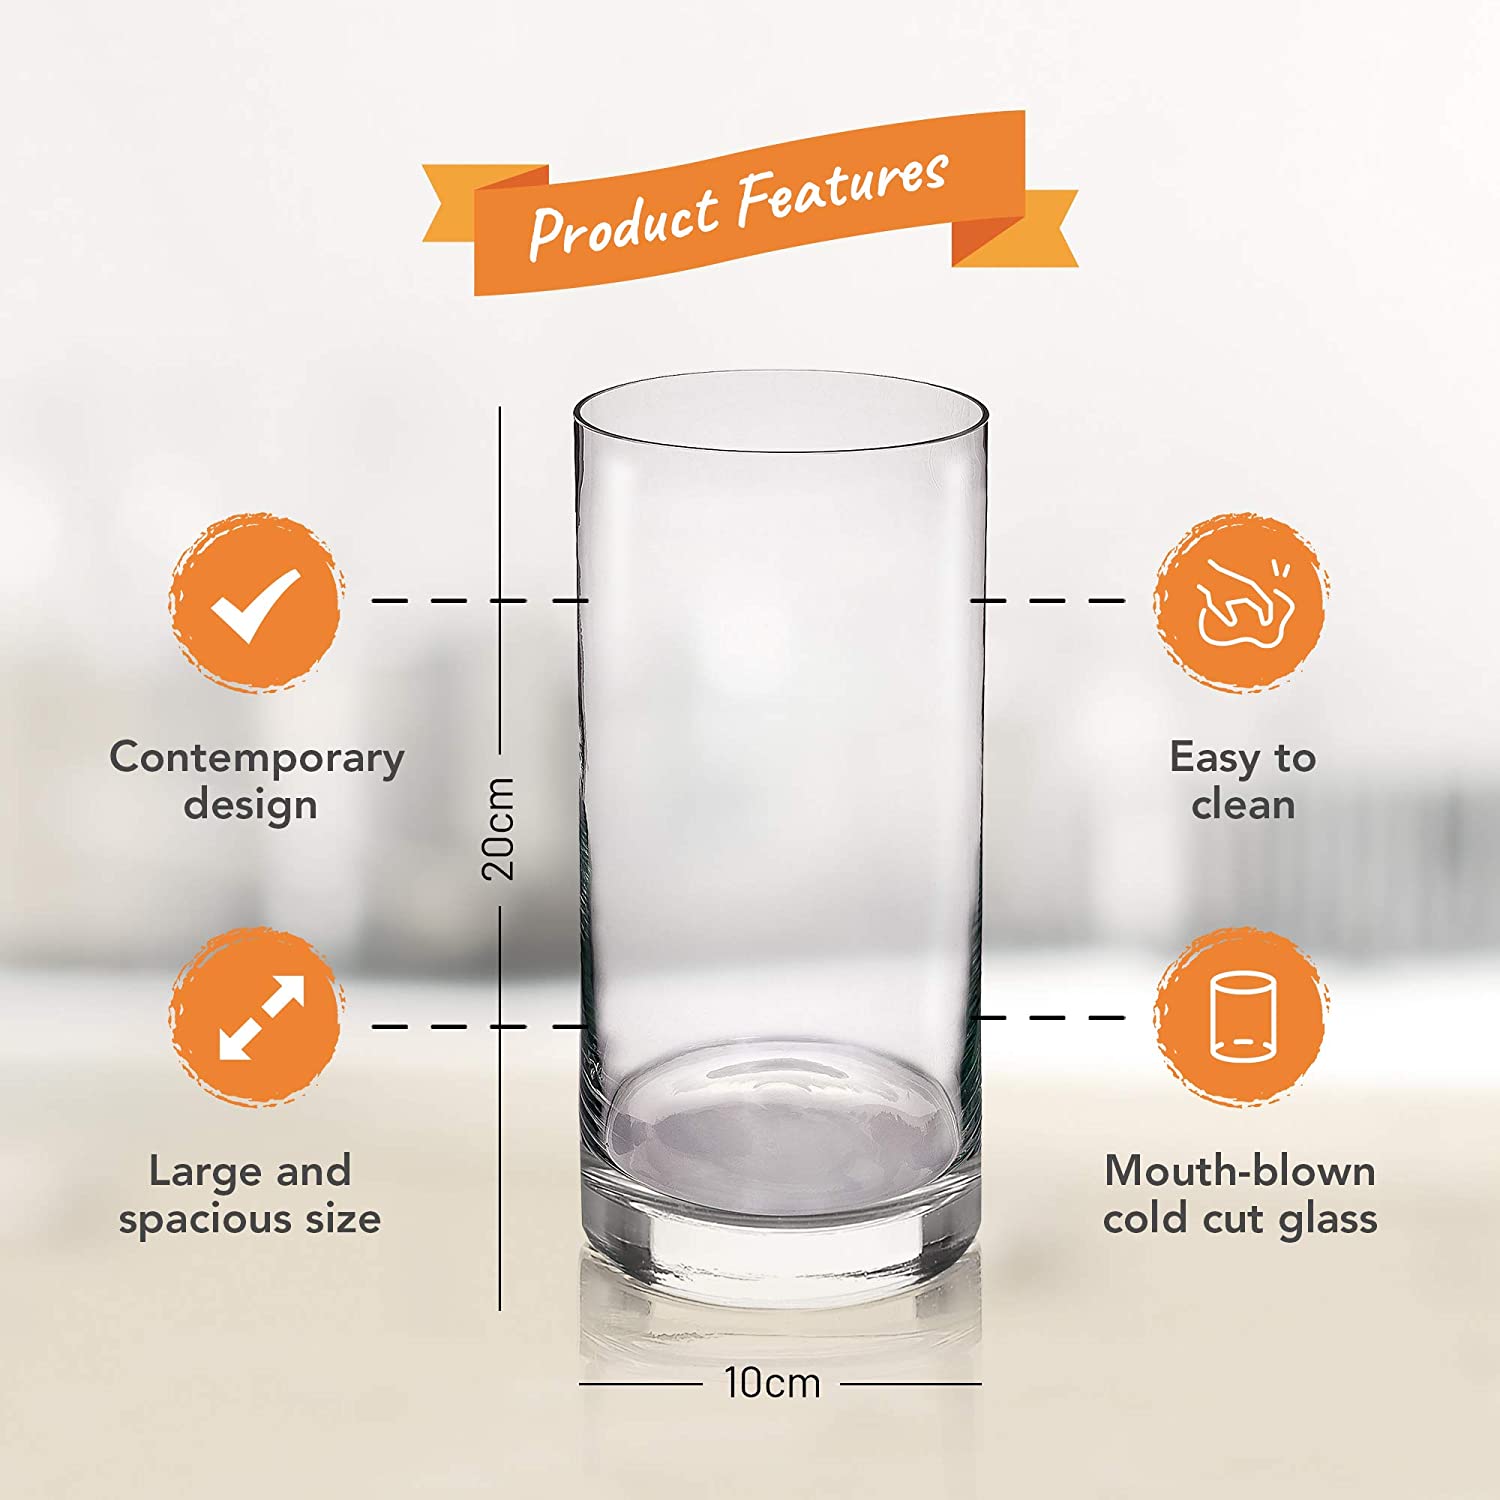 Glass Vase Product Feature